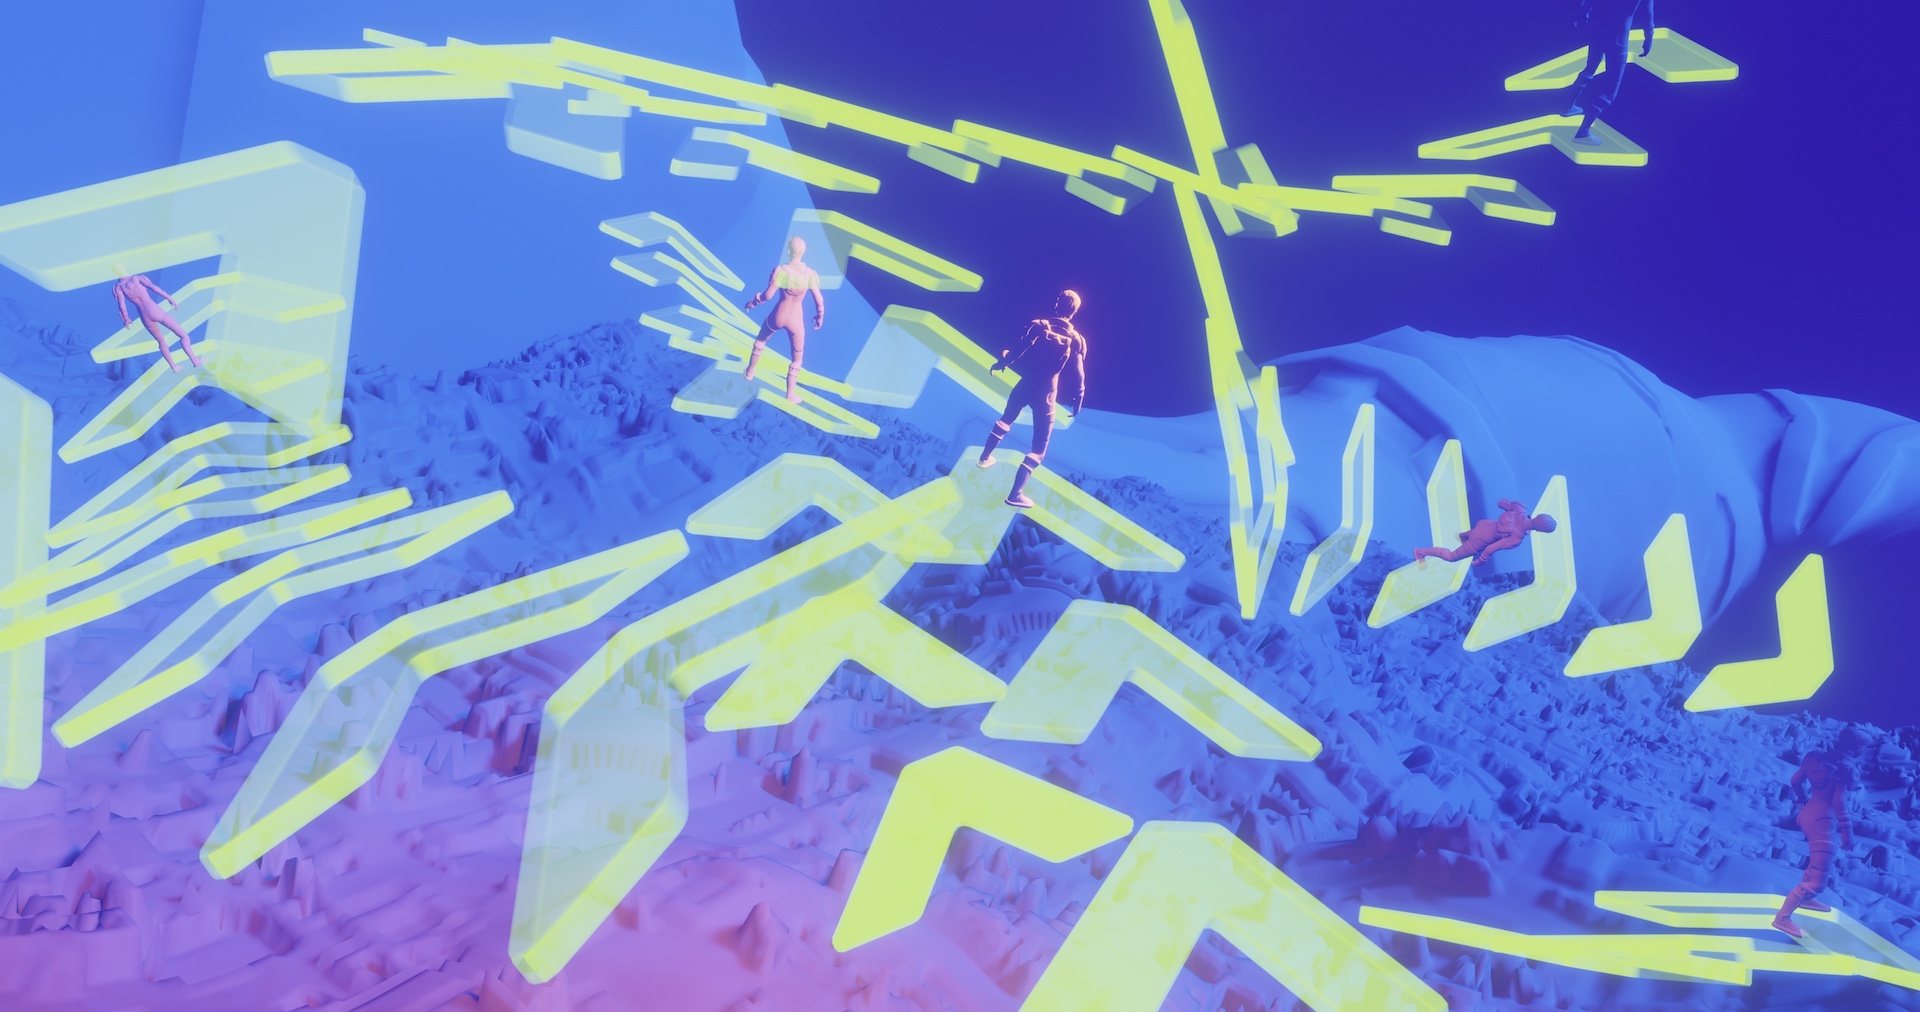 An indigo landcsape with a few mannequin-like figures standing on paths of green arrows floating and looping through space.